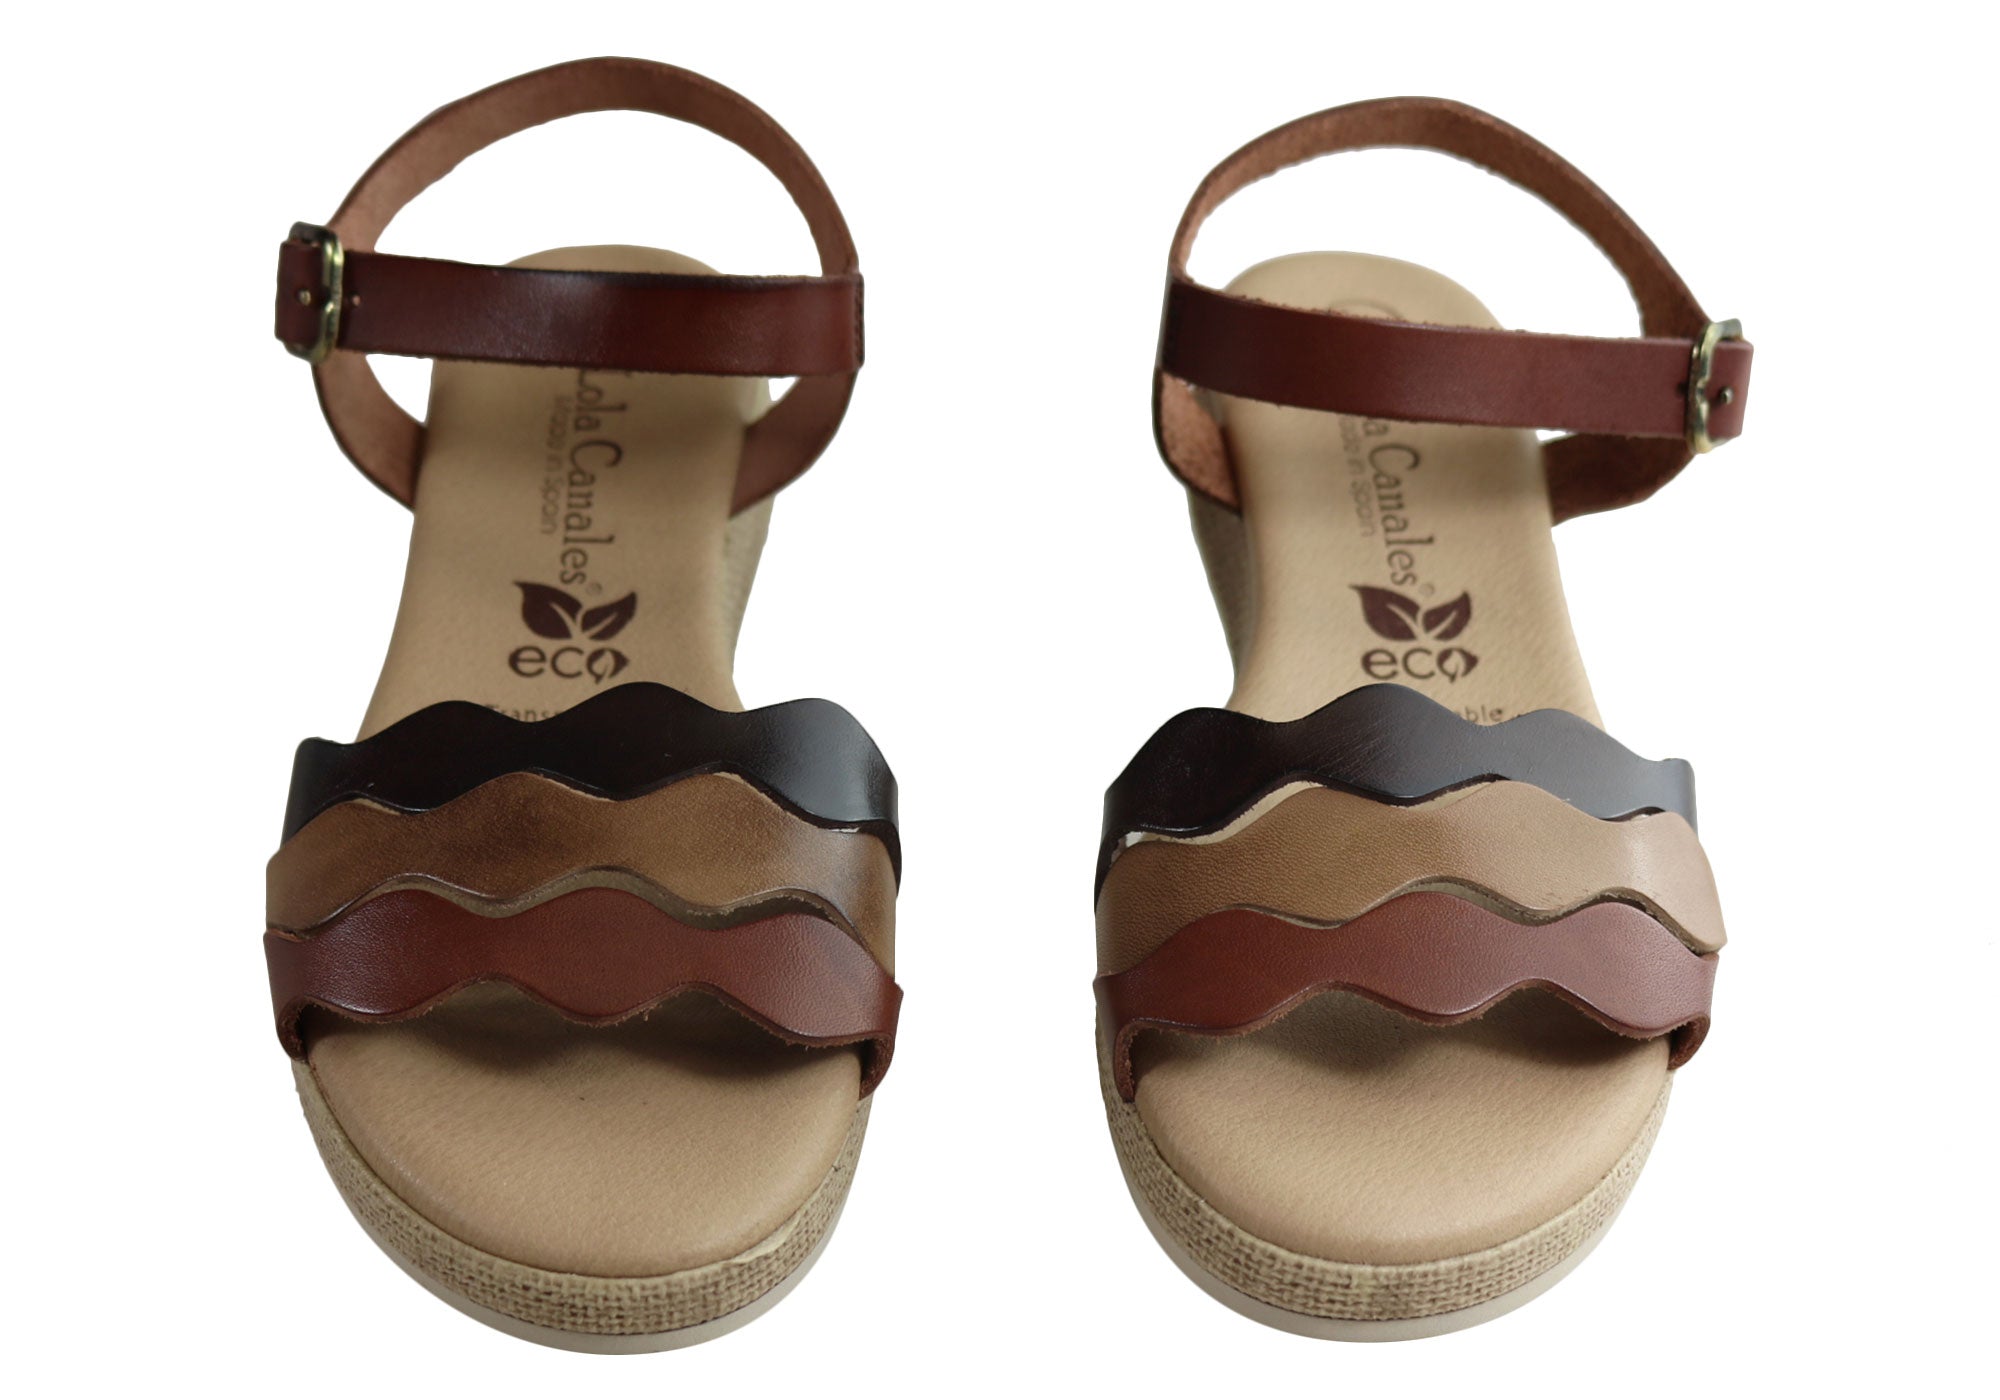 Lola Canales Vivian Womens Comfortable Leather Sandals Made In Spain